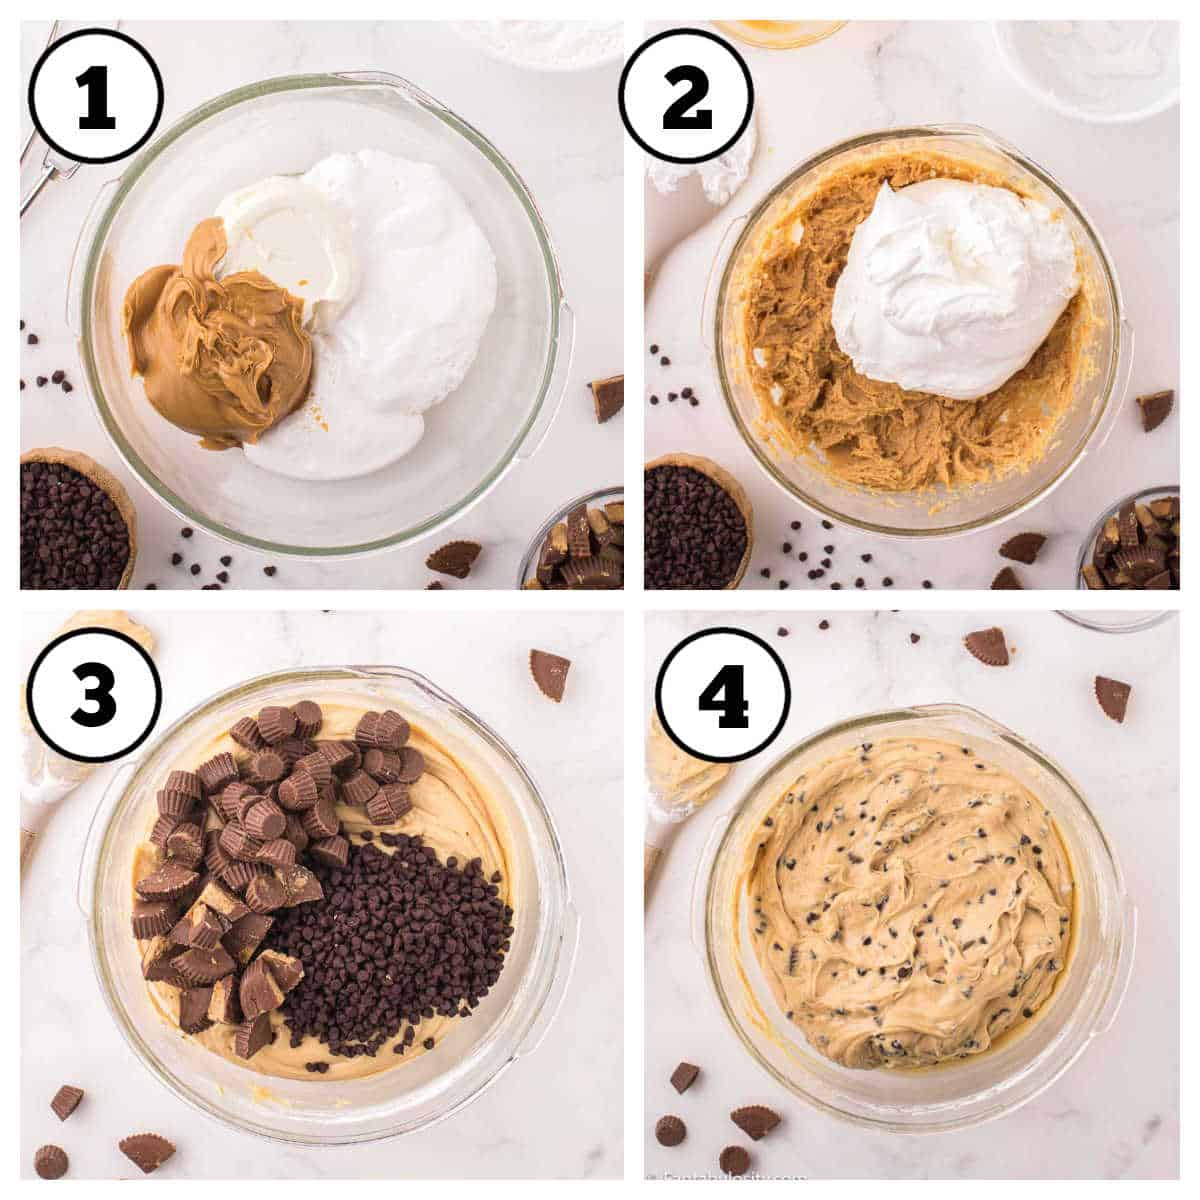 Steps 1-4 of how to make peanut butter fluff.